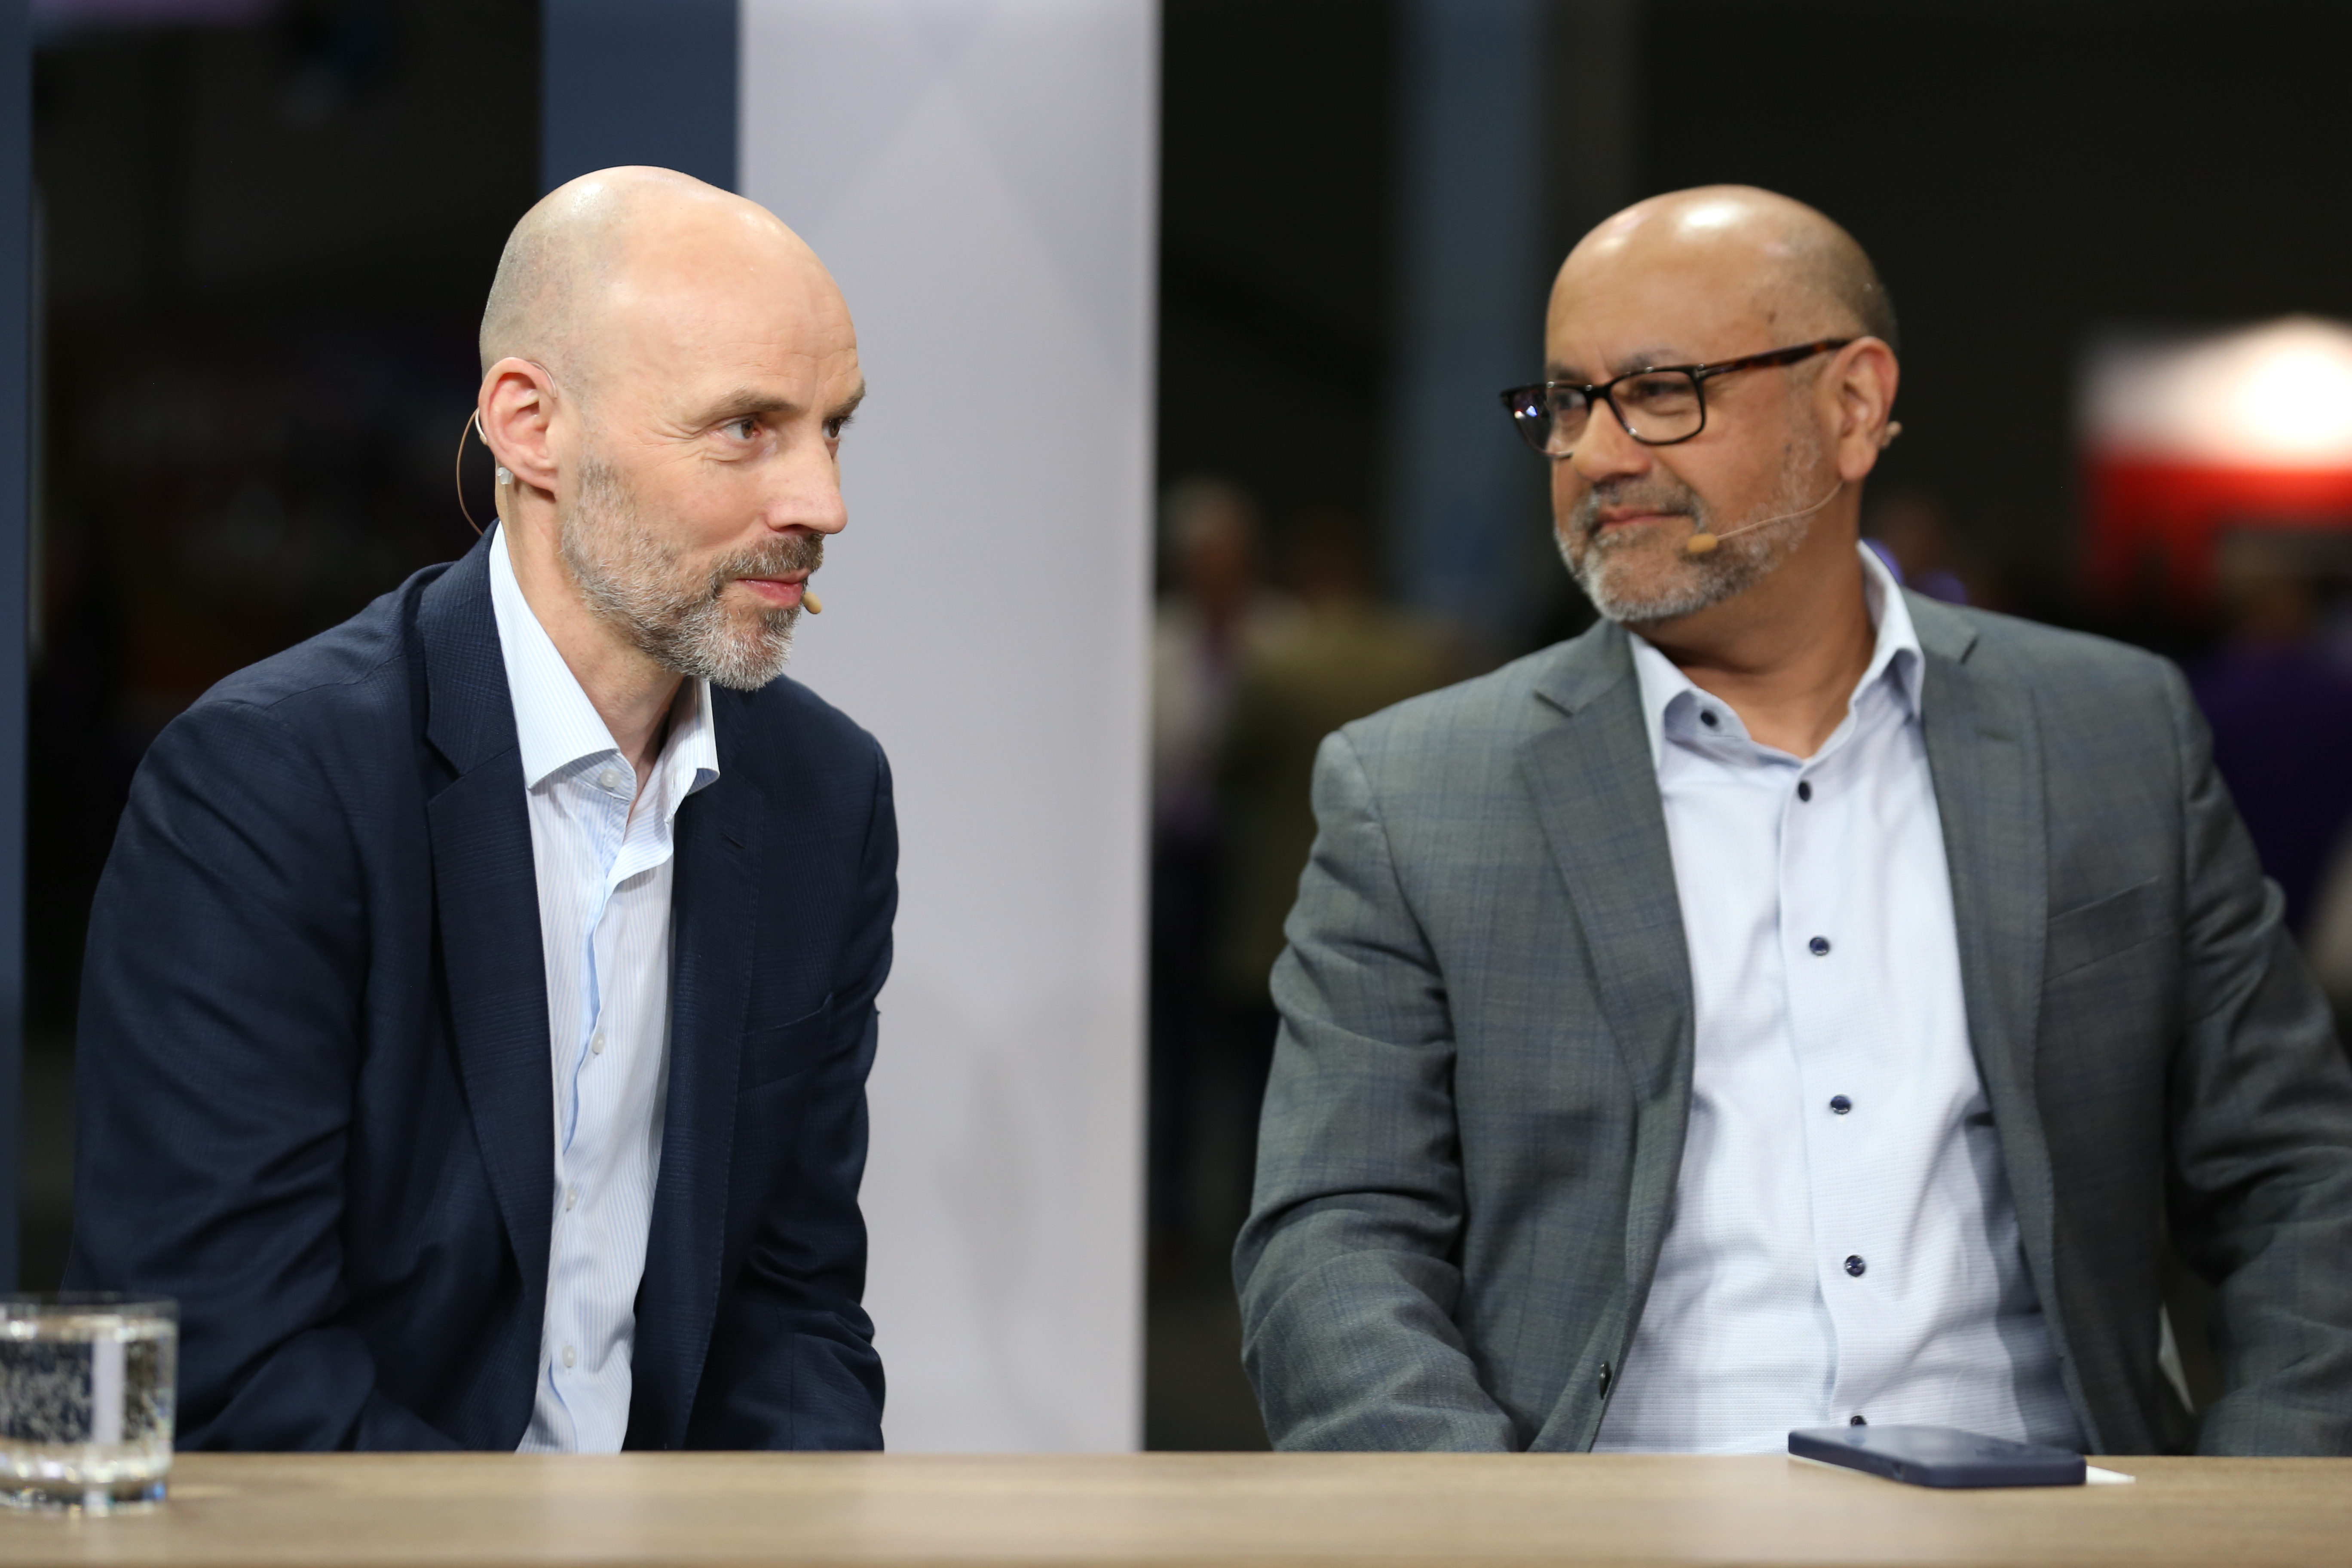 David Stark, VP and GM of Aruba networking telco solutions at Hewlett Packard Enterprise, and Anil Ganjoo, CGO of HCL, talks to theCUBE about telecom network modernization at HPE Discover 2024.